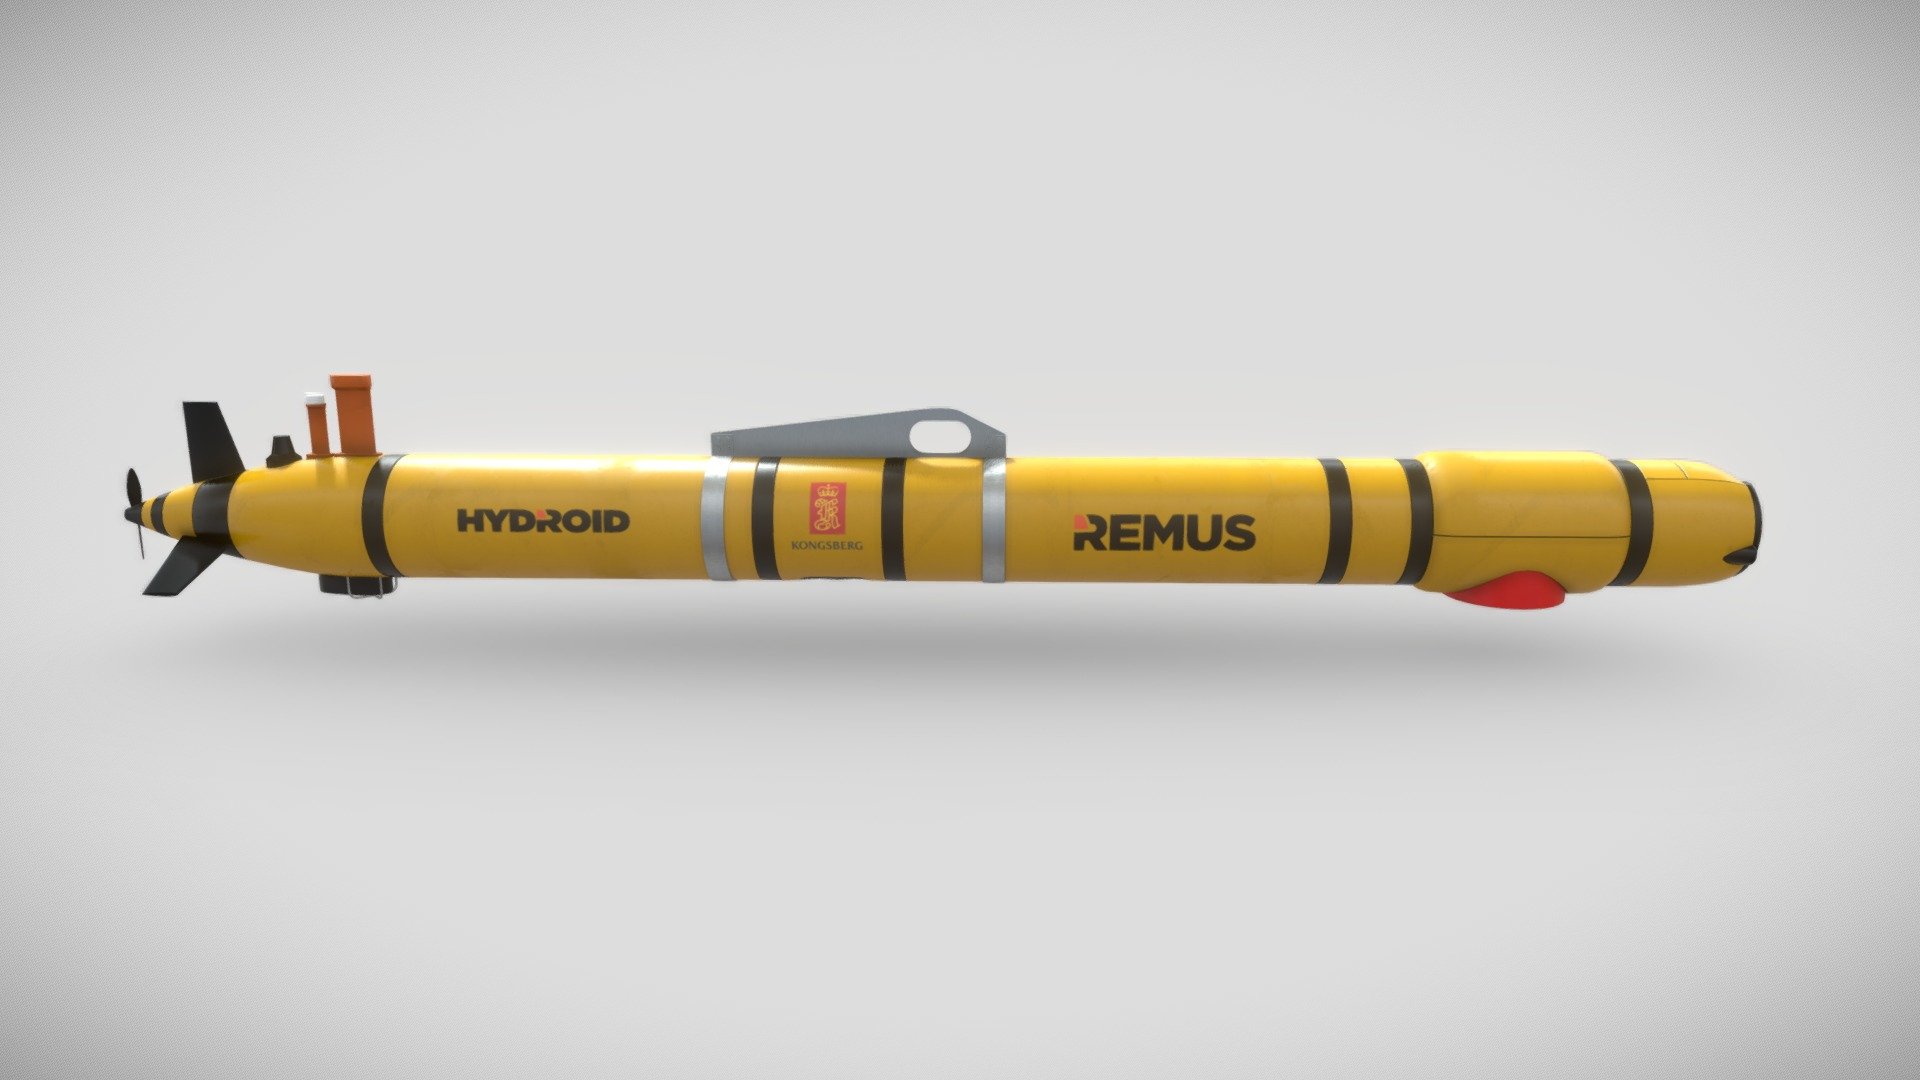 The Remus 600 is a AUV developed by Kongsberg 3d model